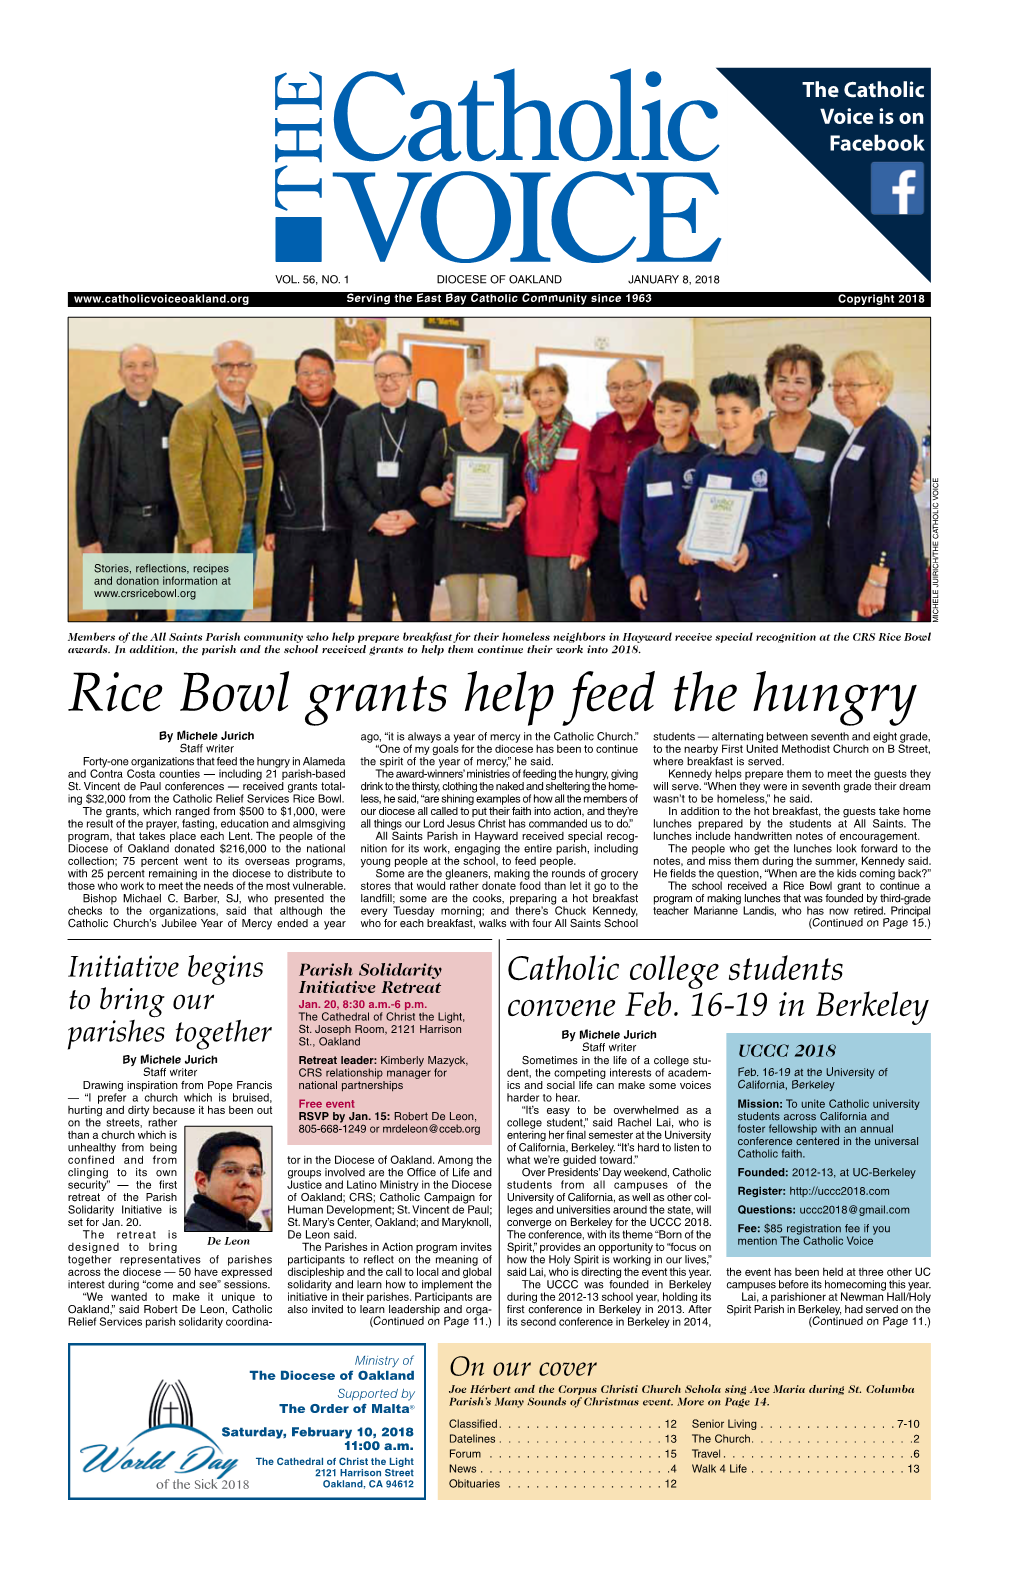 Rice Bowl Grants Help Feed the Hungry